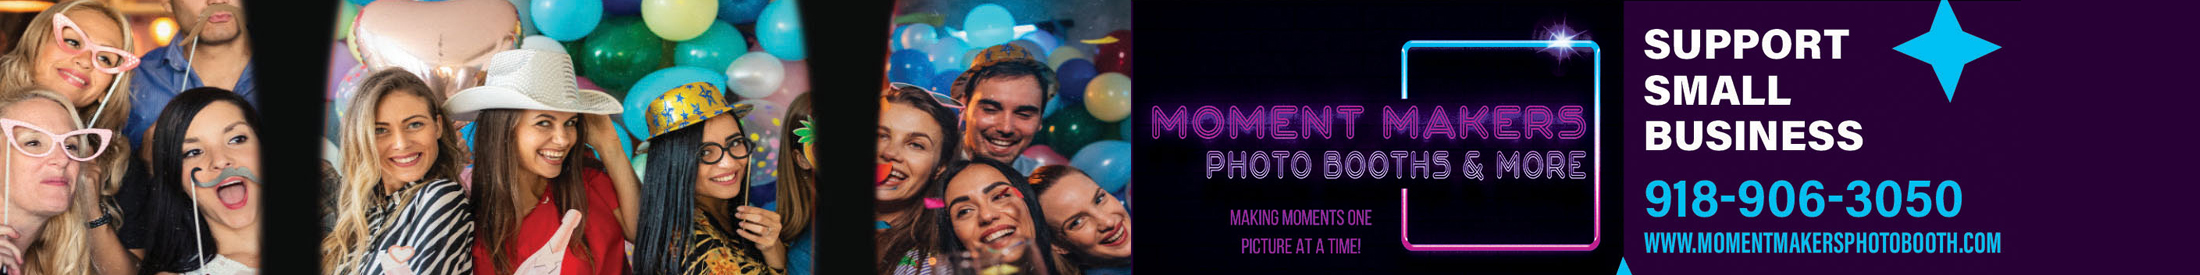 Image of Moment Makers Photo Booth Advertisement